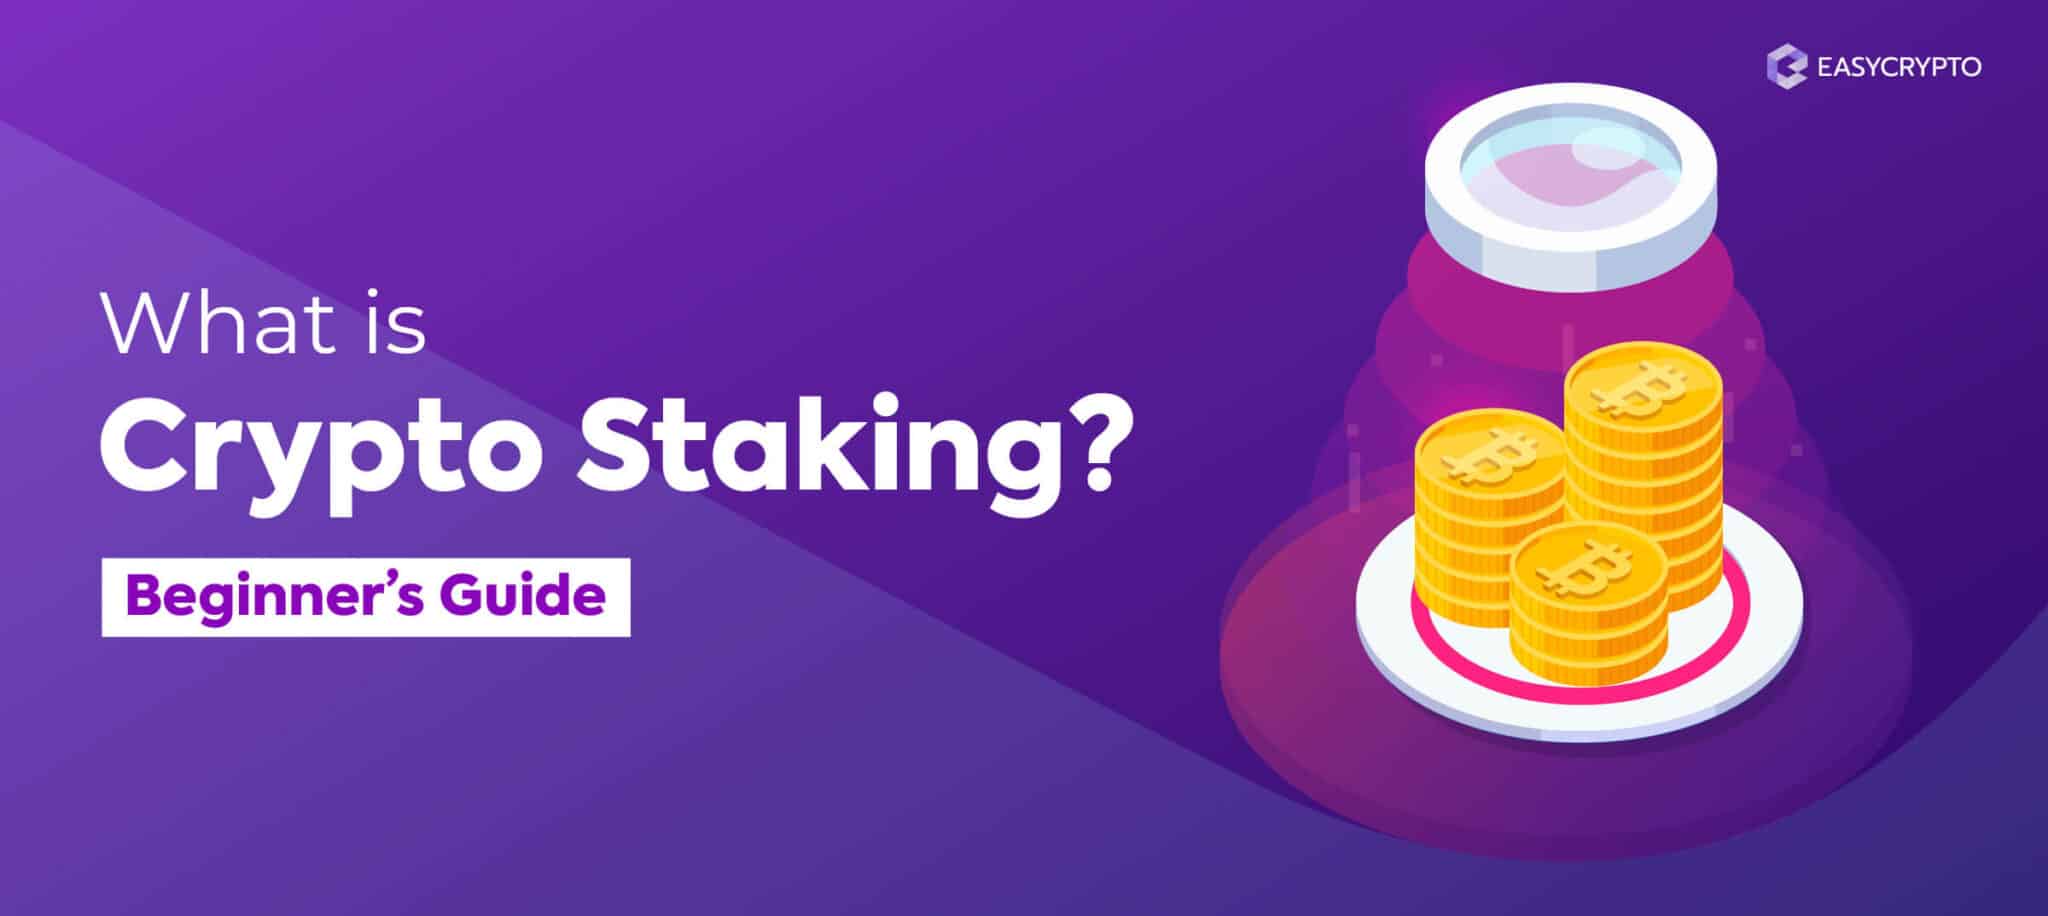 What is Crypto Staking?